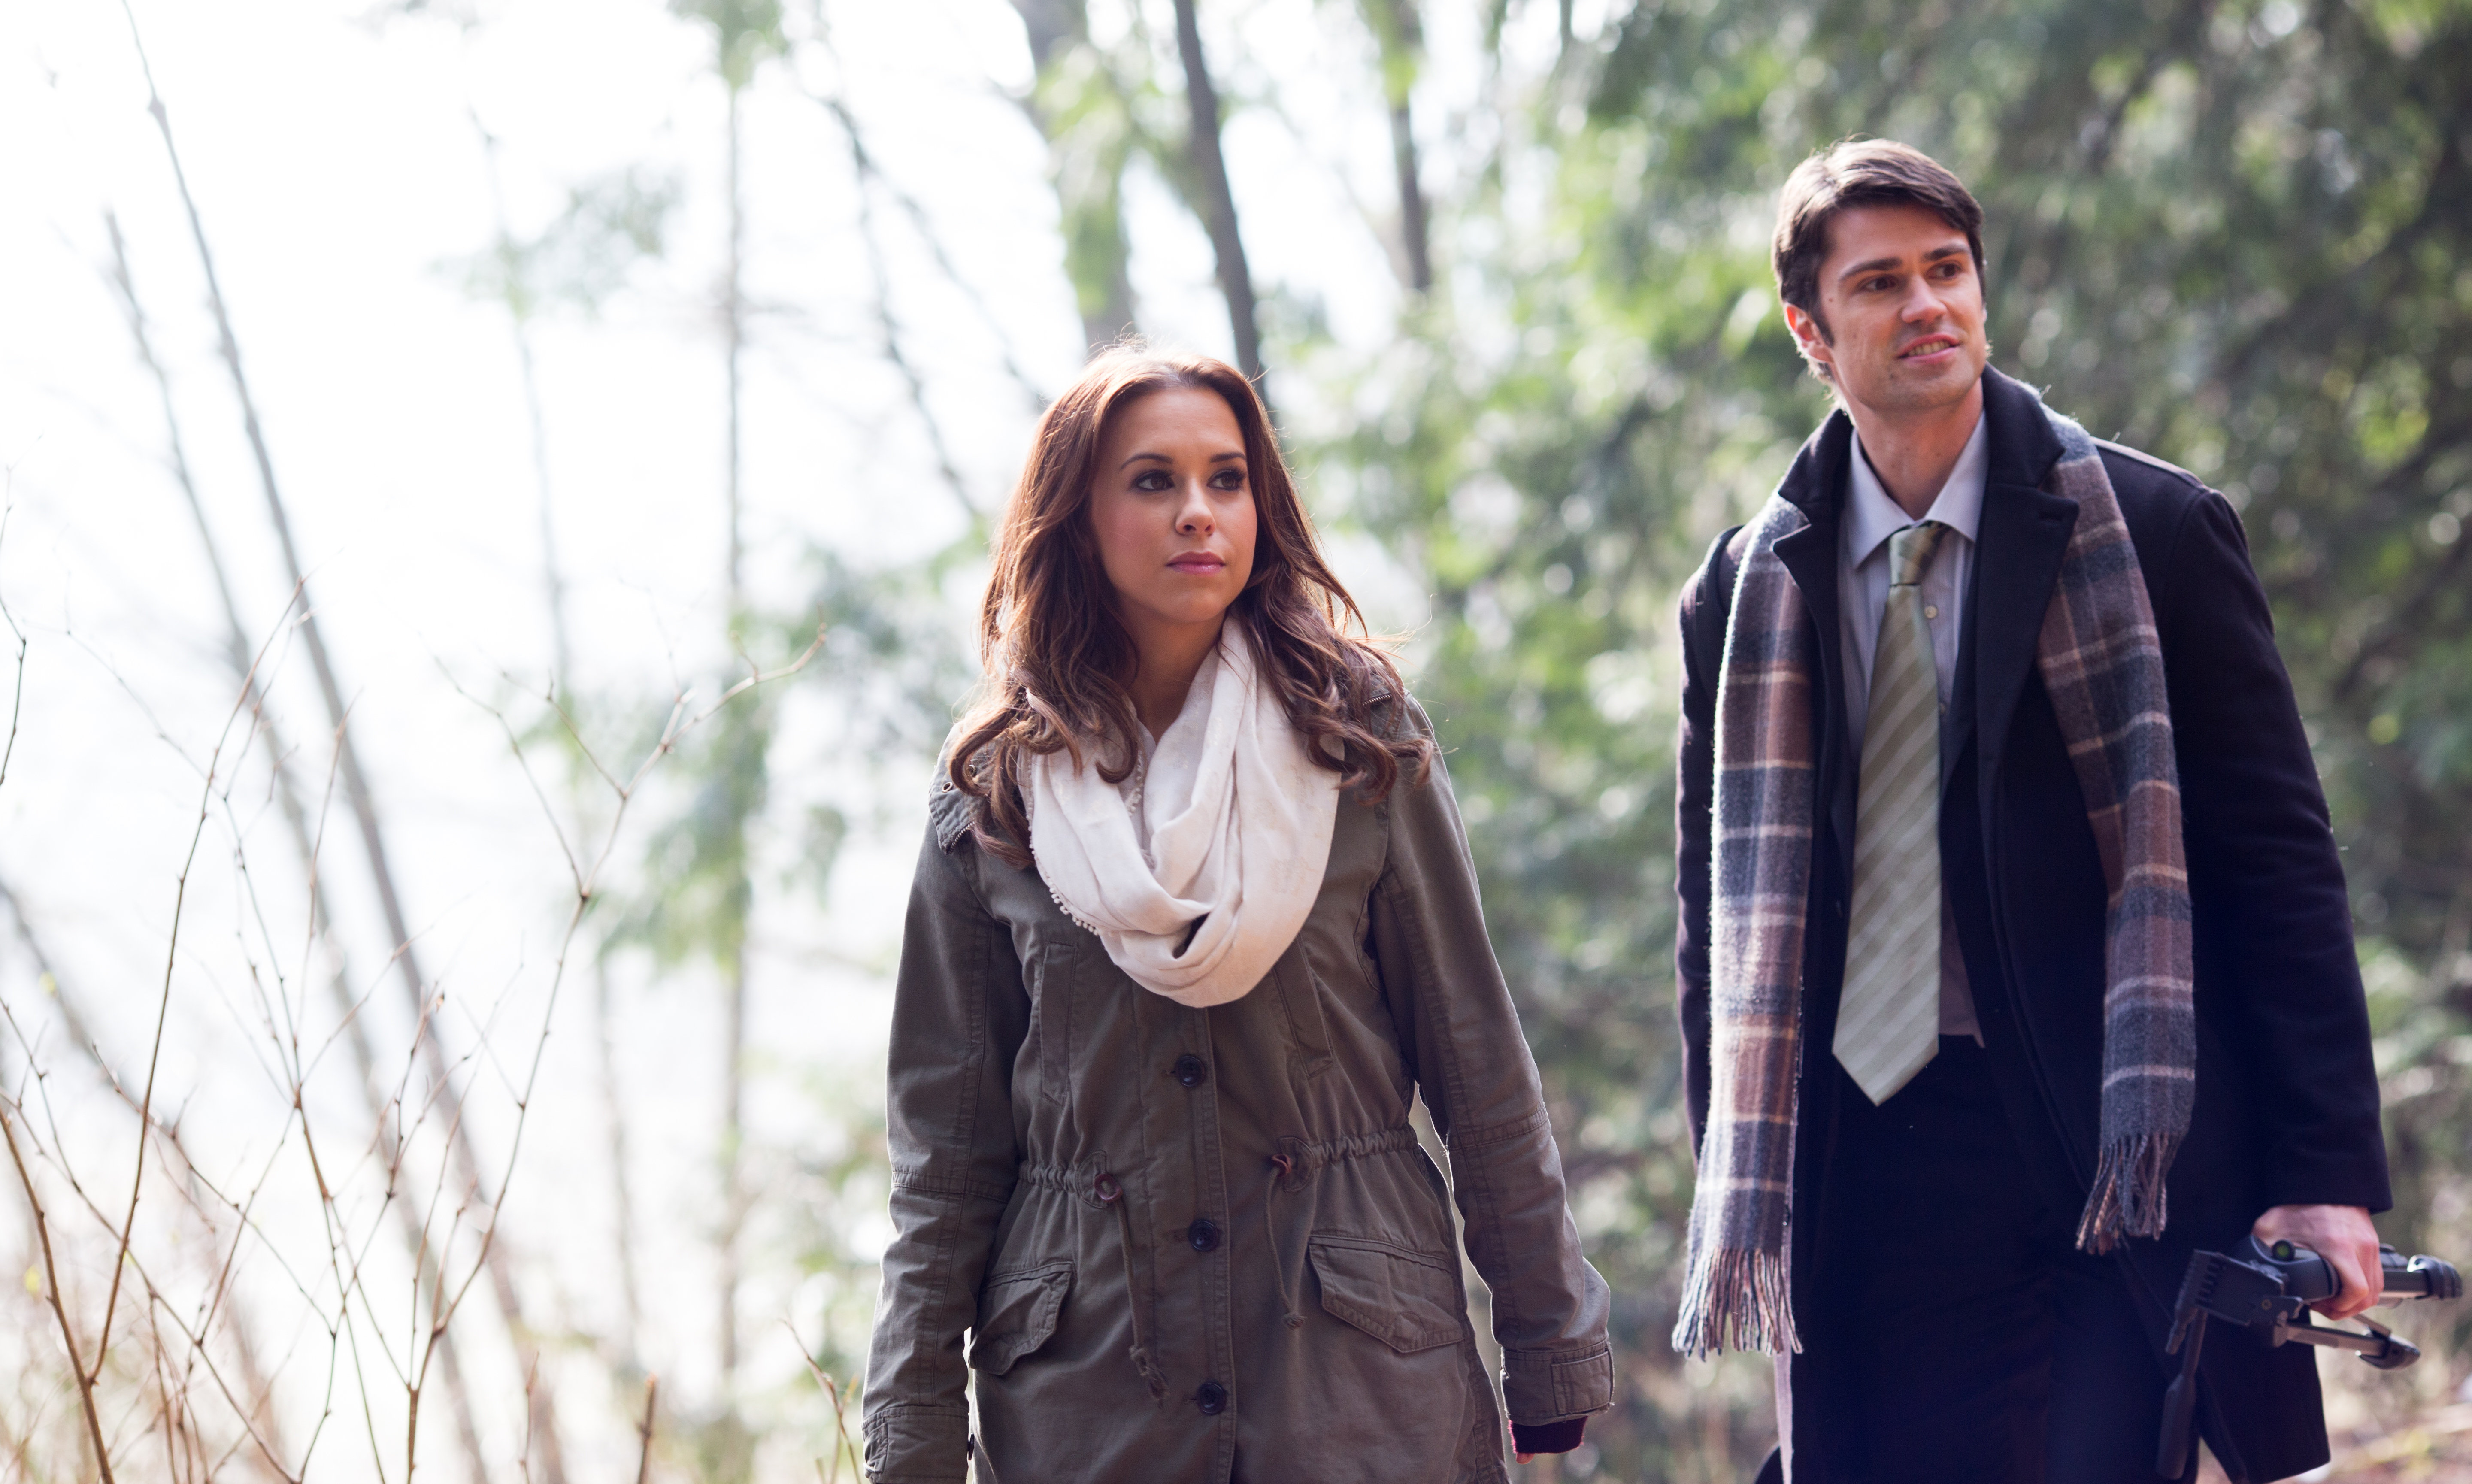 Still of Lacey Chabert and Corey Sevier in The Tree That Saved Christmas (2014)